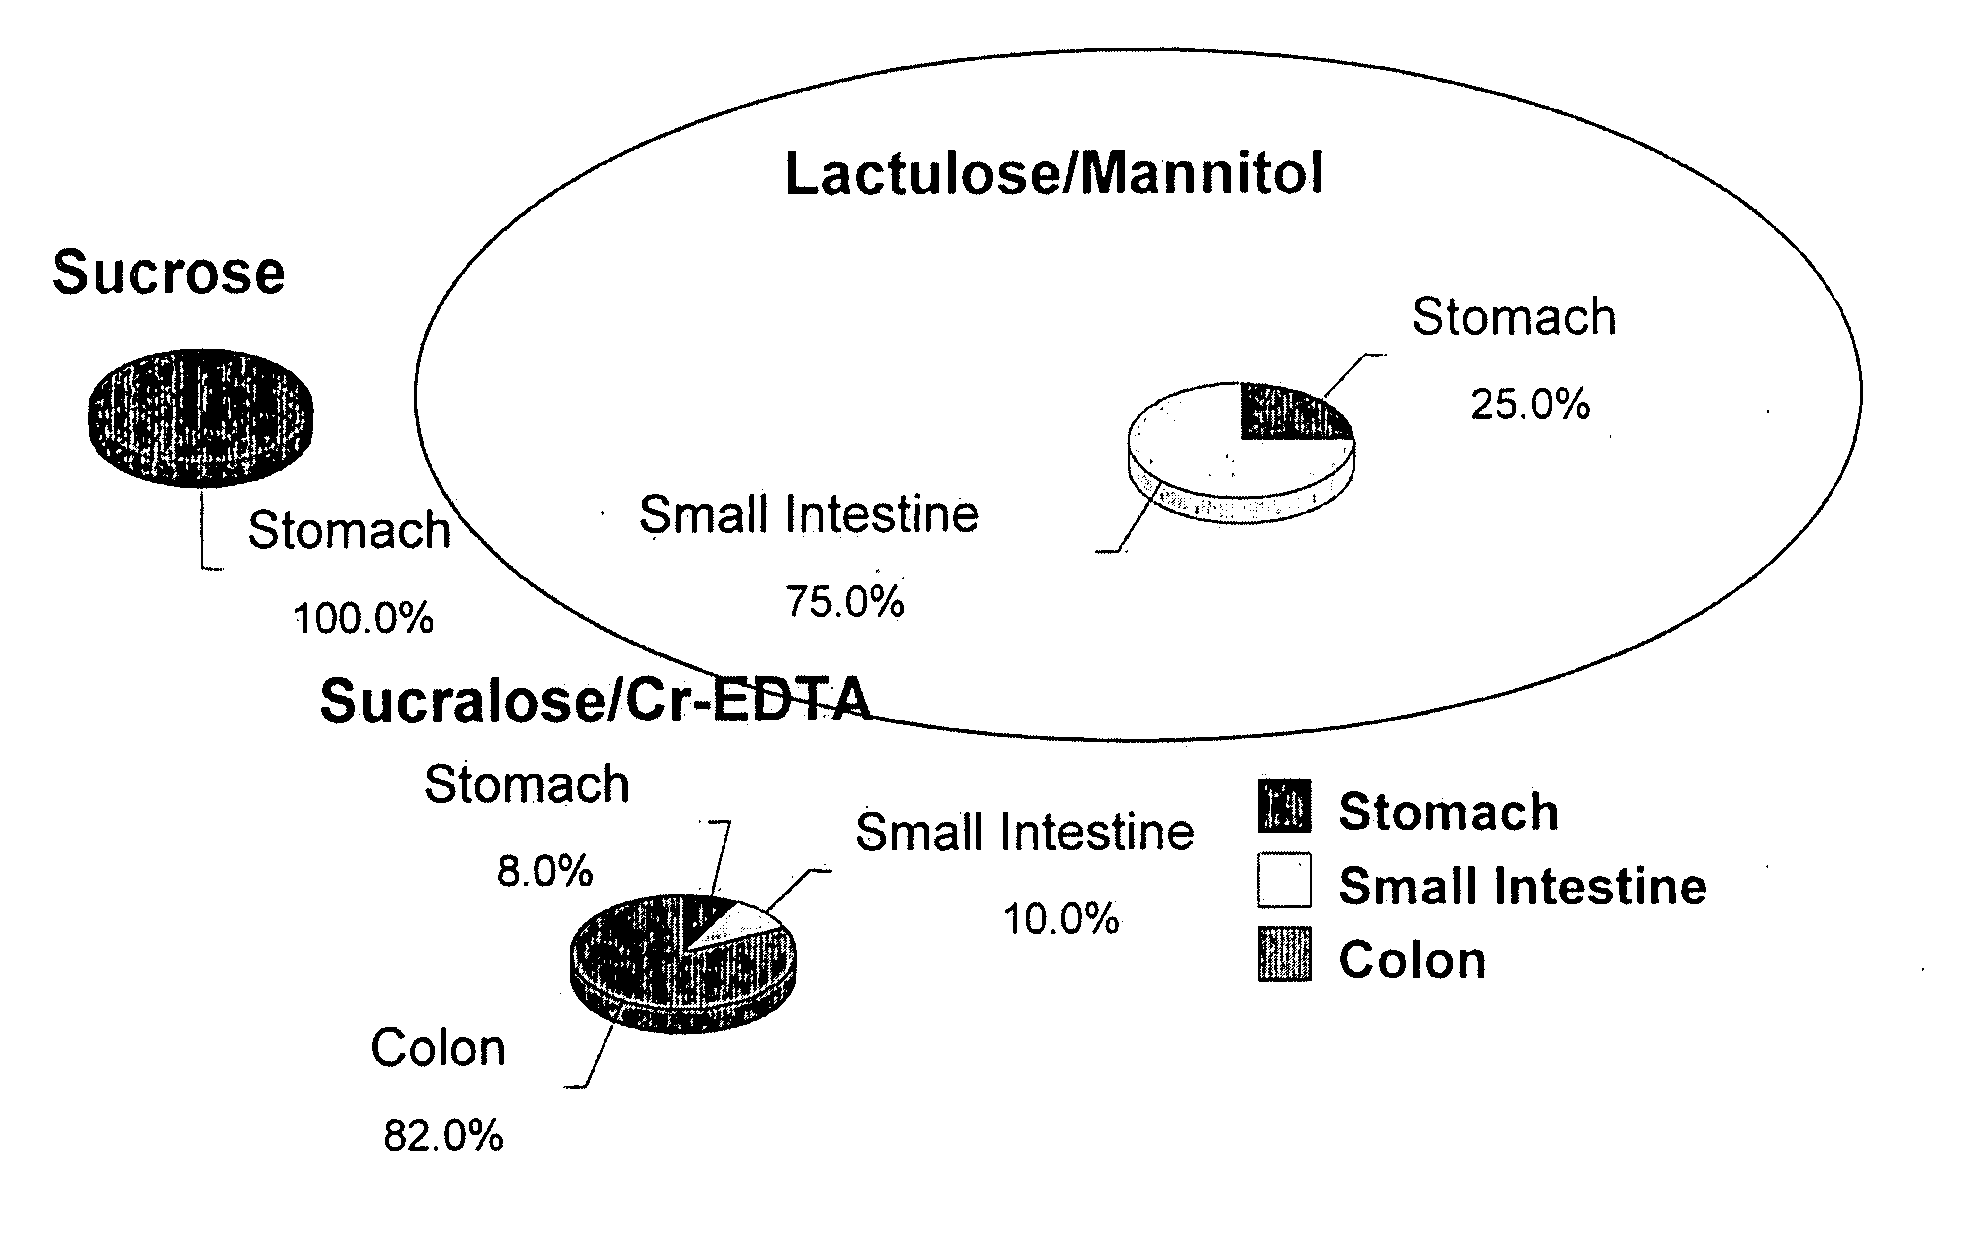 Materials and methods for the treatment of celiac disease